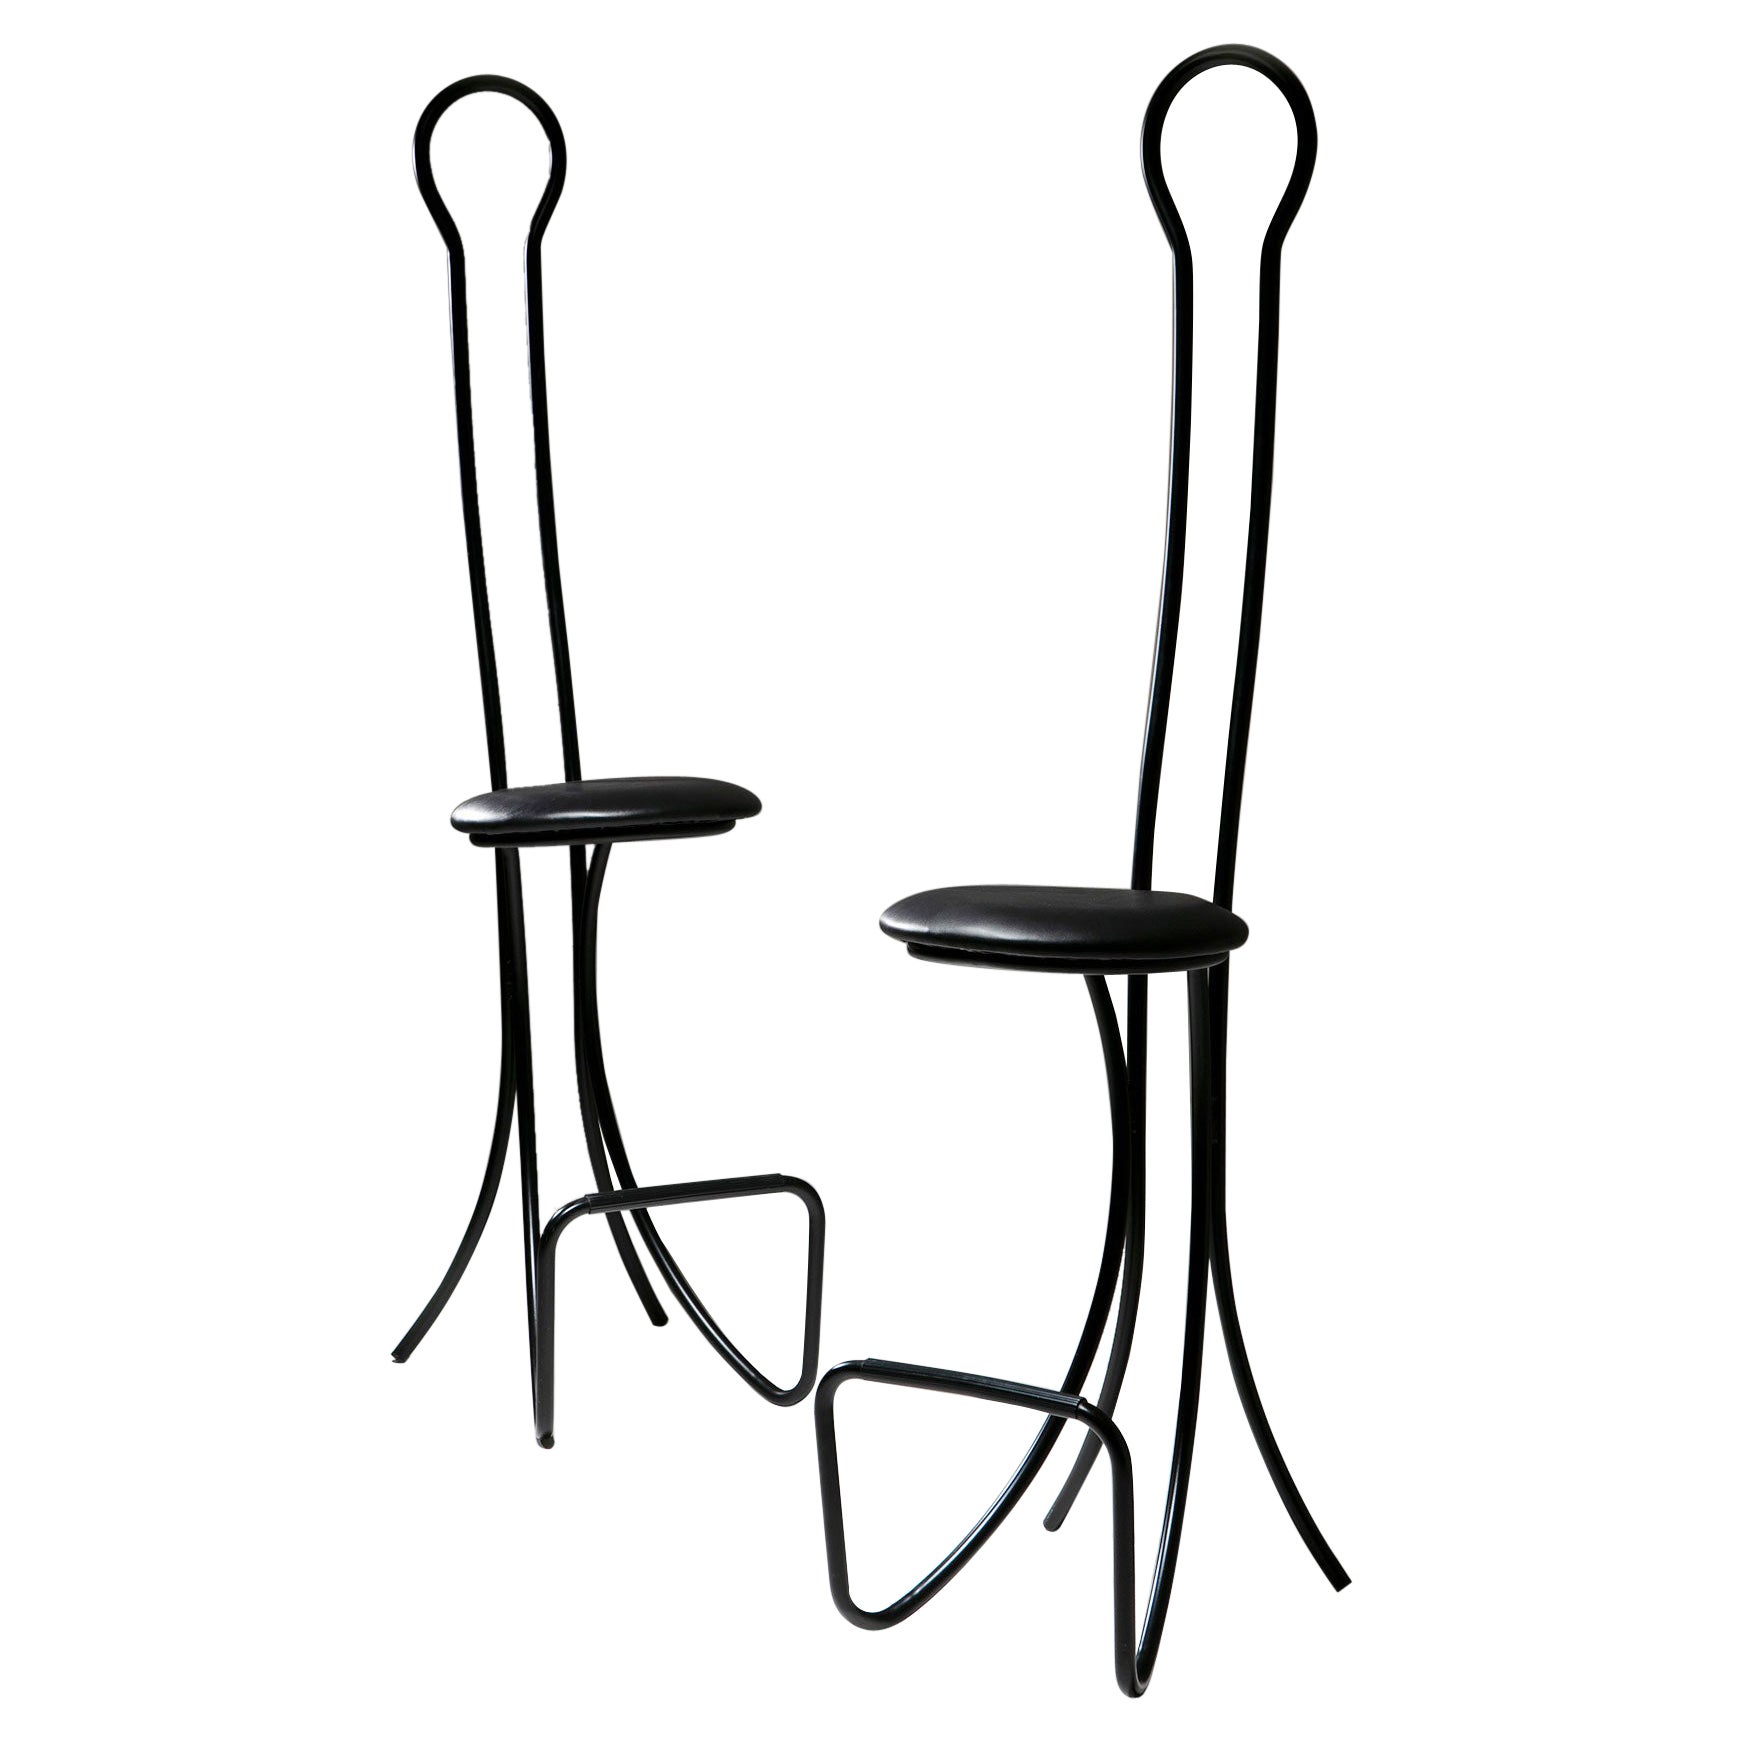 Pair of "Spluga" Black Metal High Stools by Castiglioni for Zanotta, Italy, 1960 For Sale